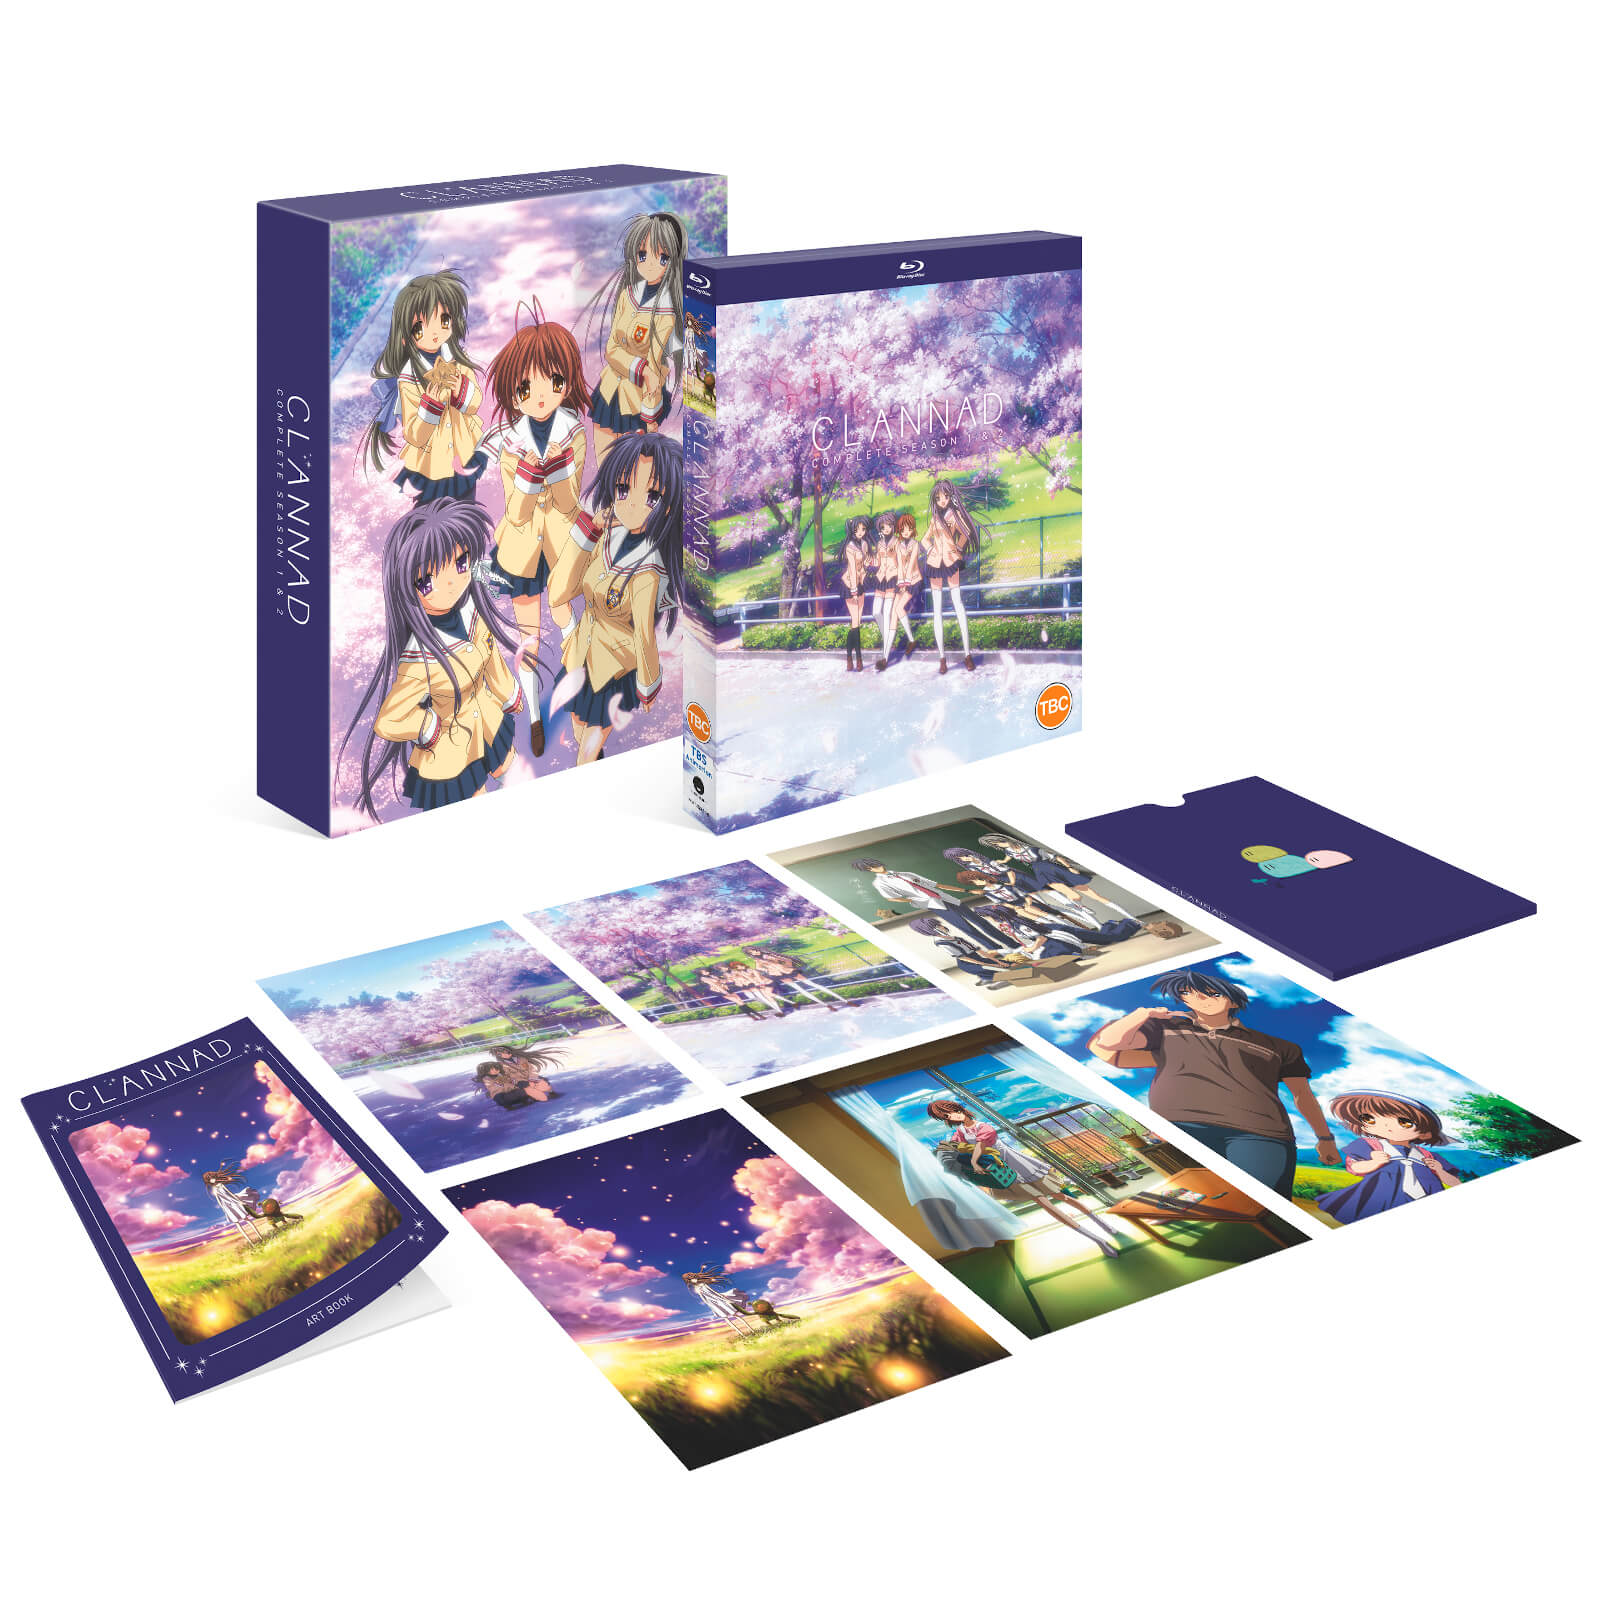 Clannad: After Story - Complete Collection (DVD, 2011, 4-Disc Set